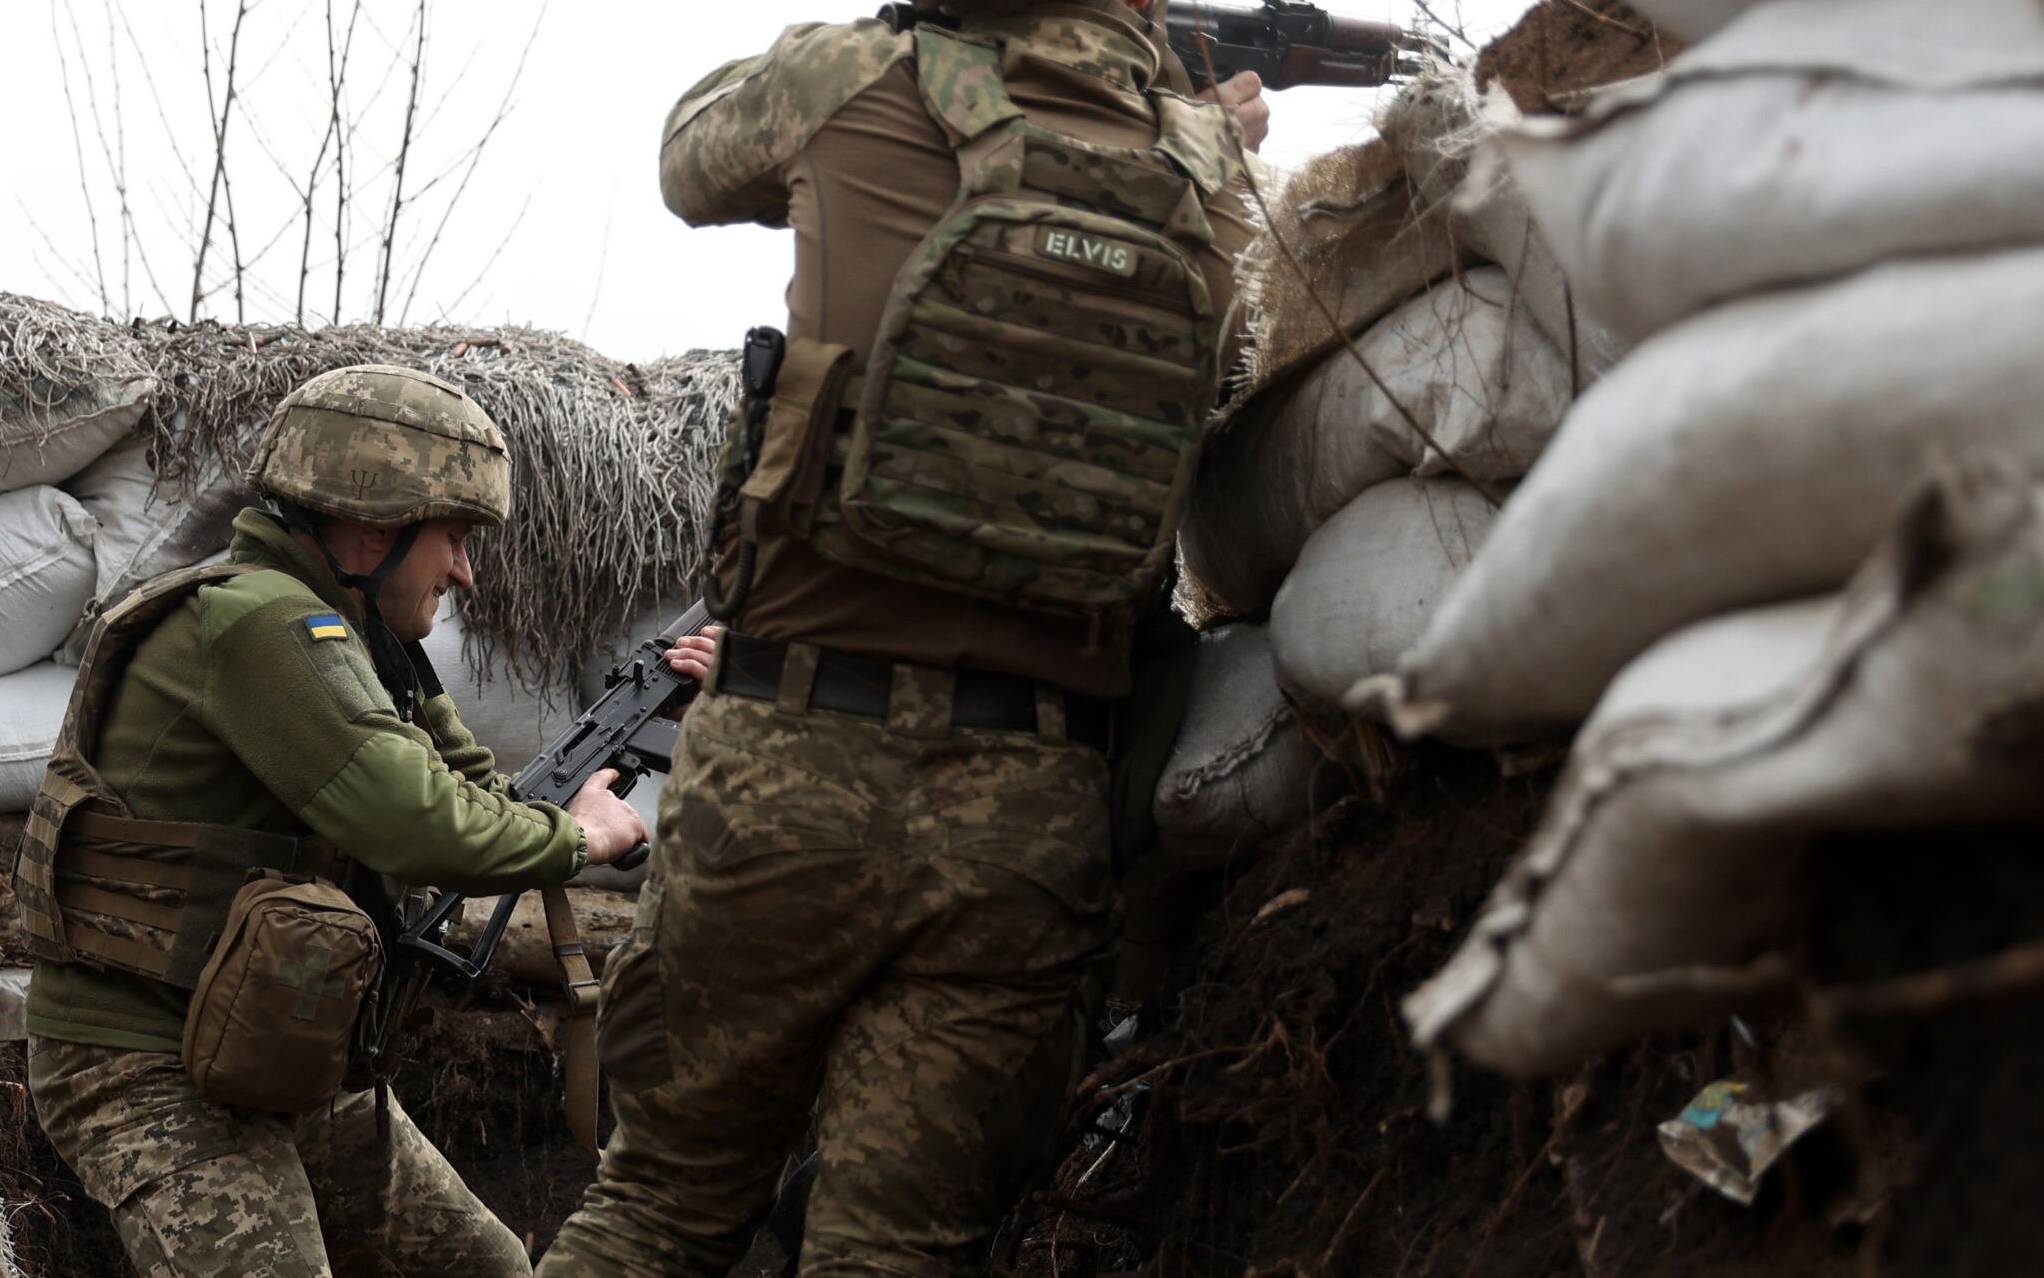 Ukrainian soldiers shoot with assault rifles in a trench on the front line with Russian troops in Lugansk region on April 11, 2022. (Photo by Anatolii STEPANOV / AFP)